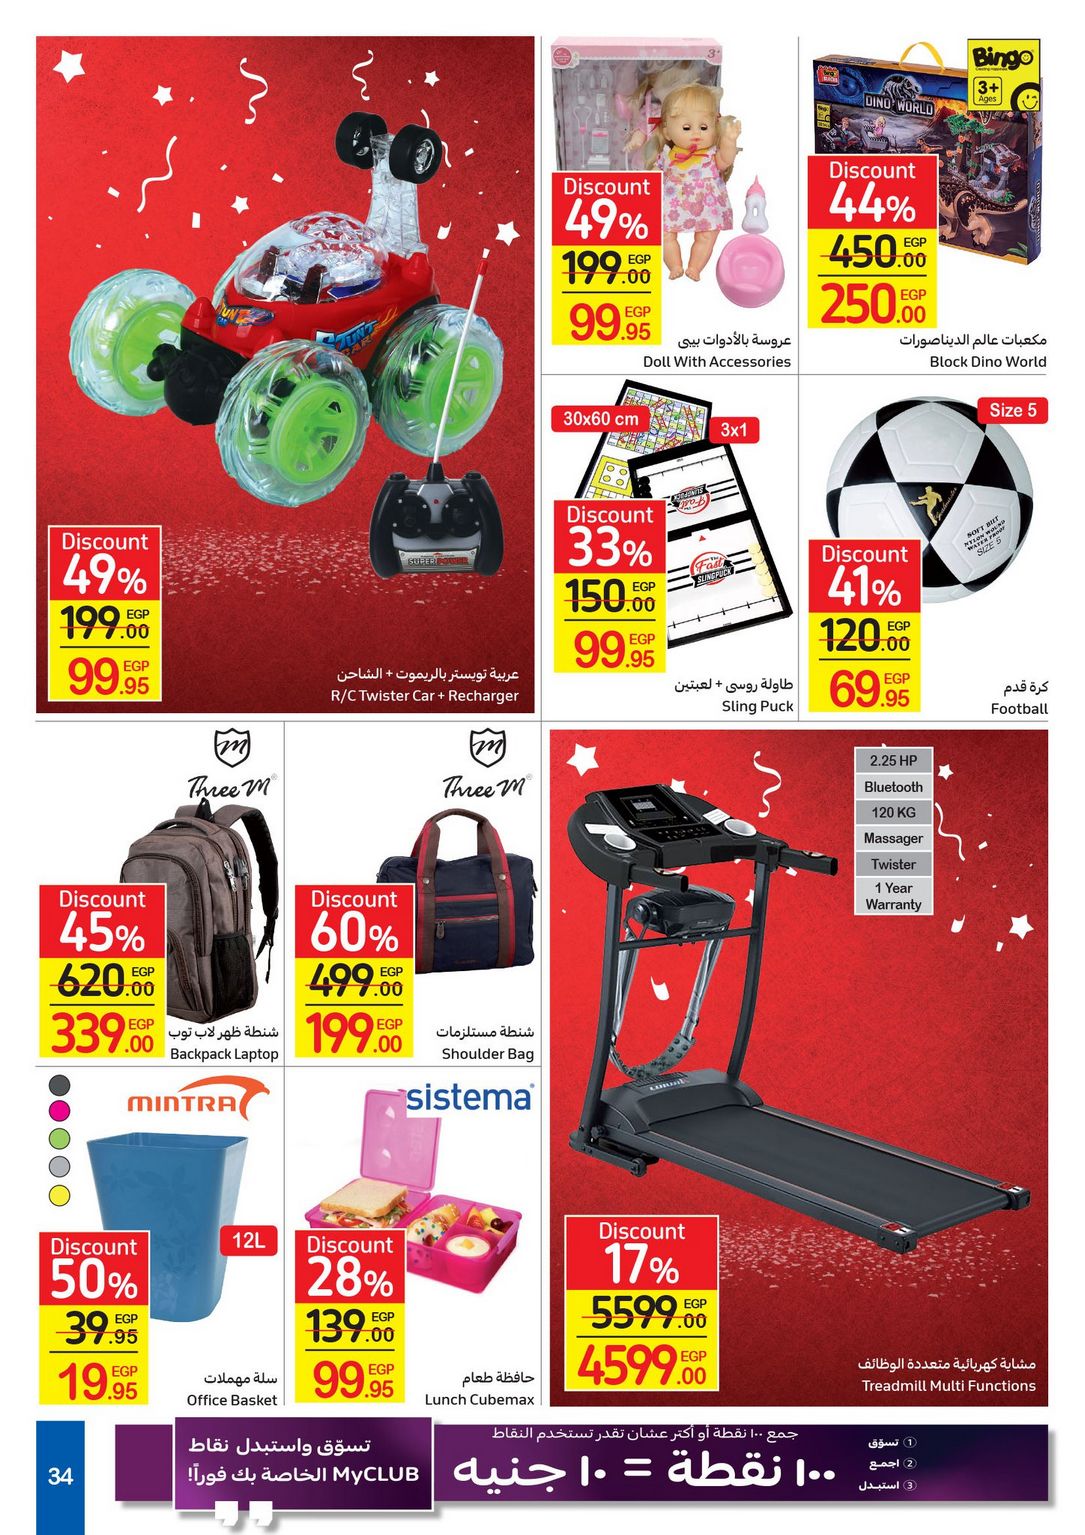 Carrefour Anniversary Offers till 18/2/2021 | Carrefour Egypt 36